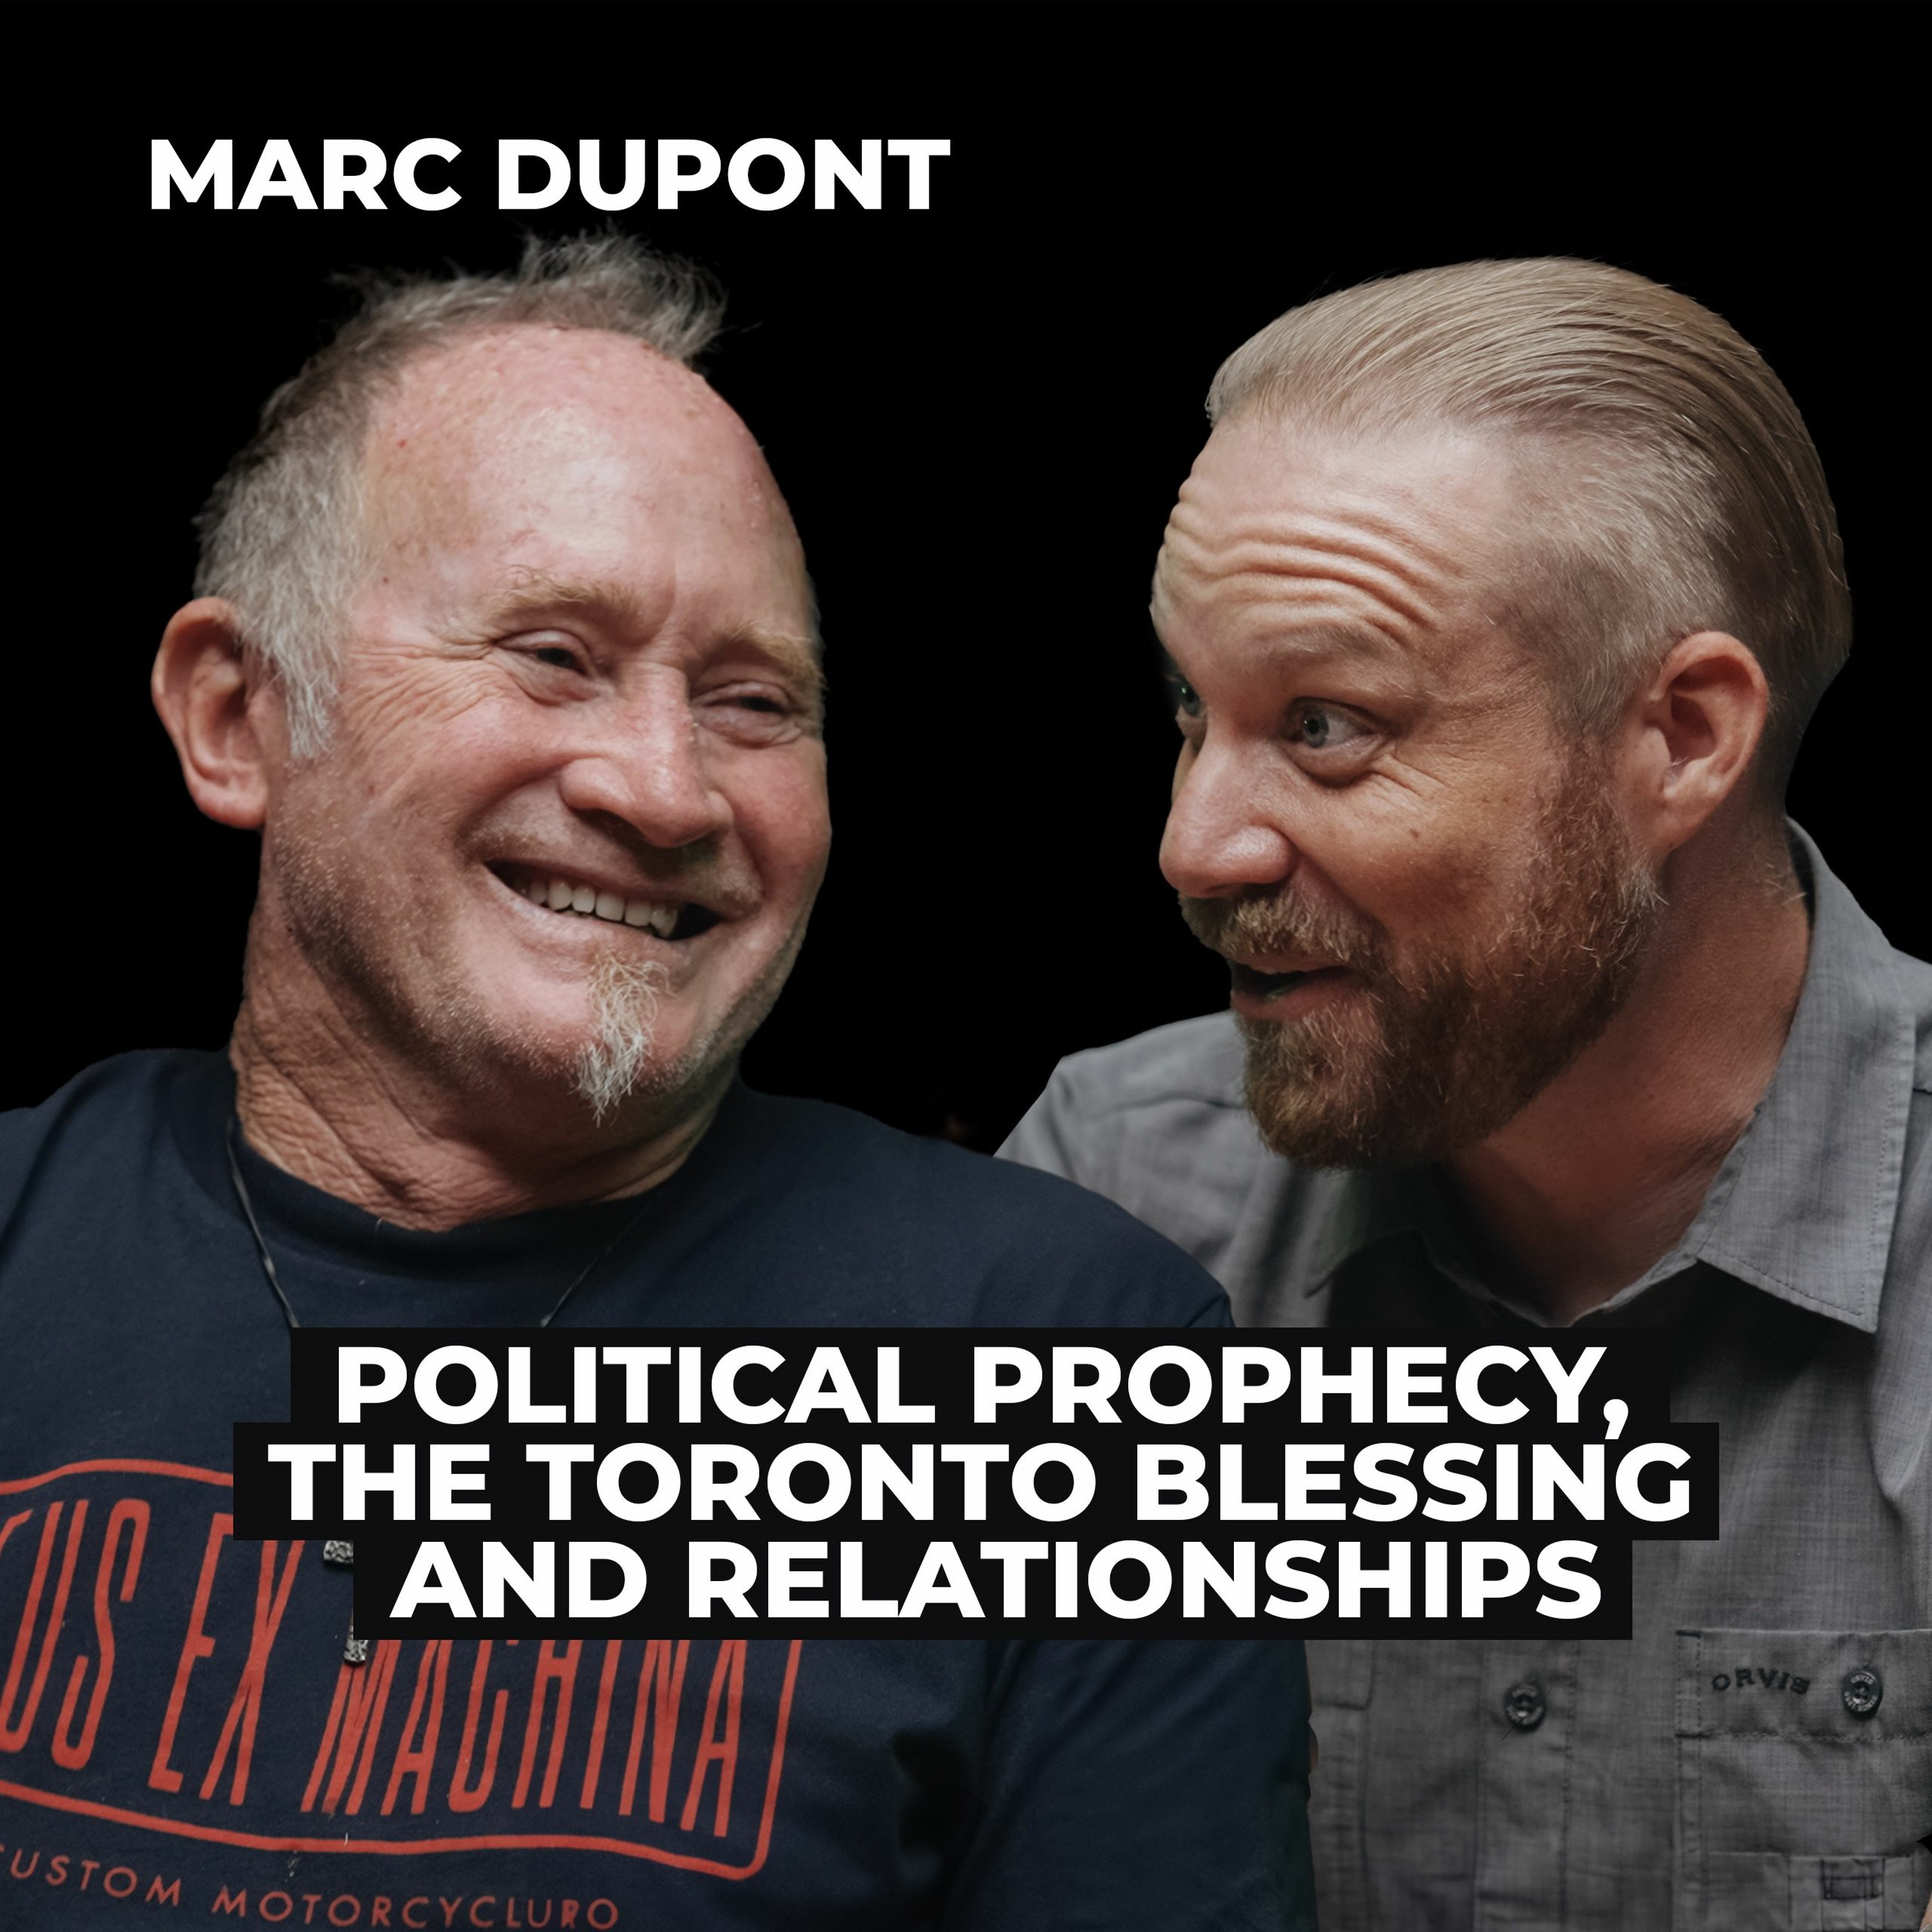 Marc Dupont: Political Prophecy, the Toronto Blessing & Relationships